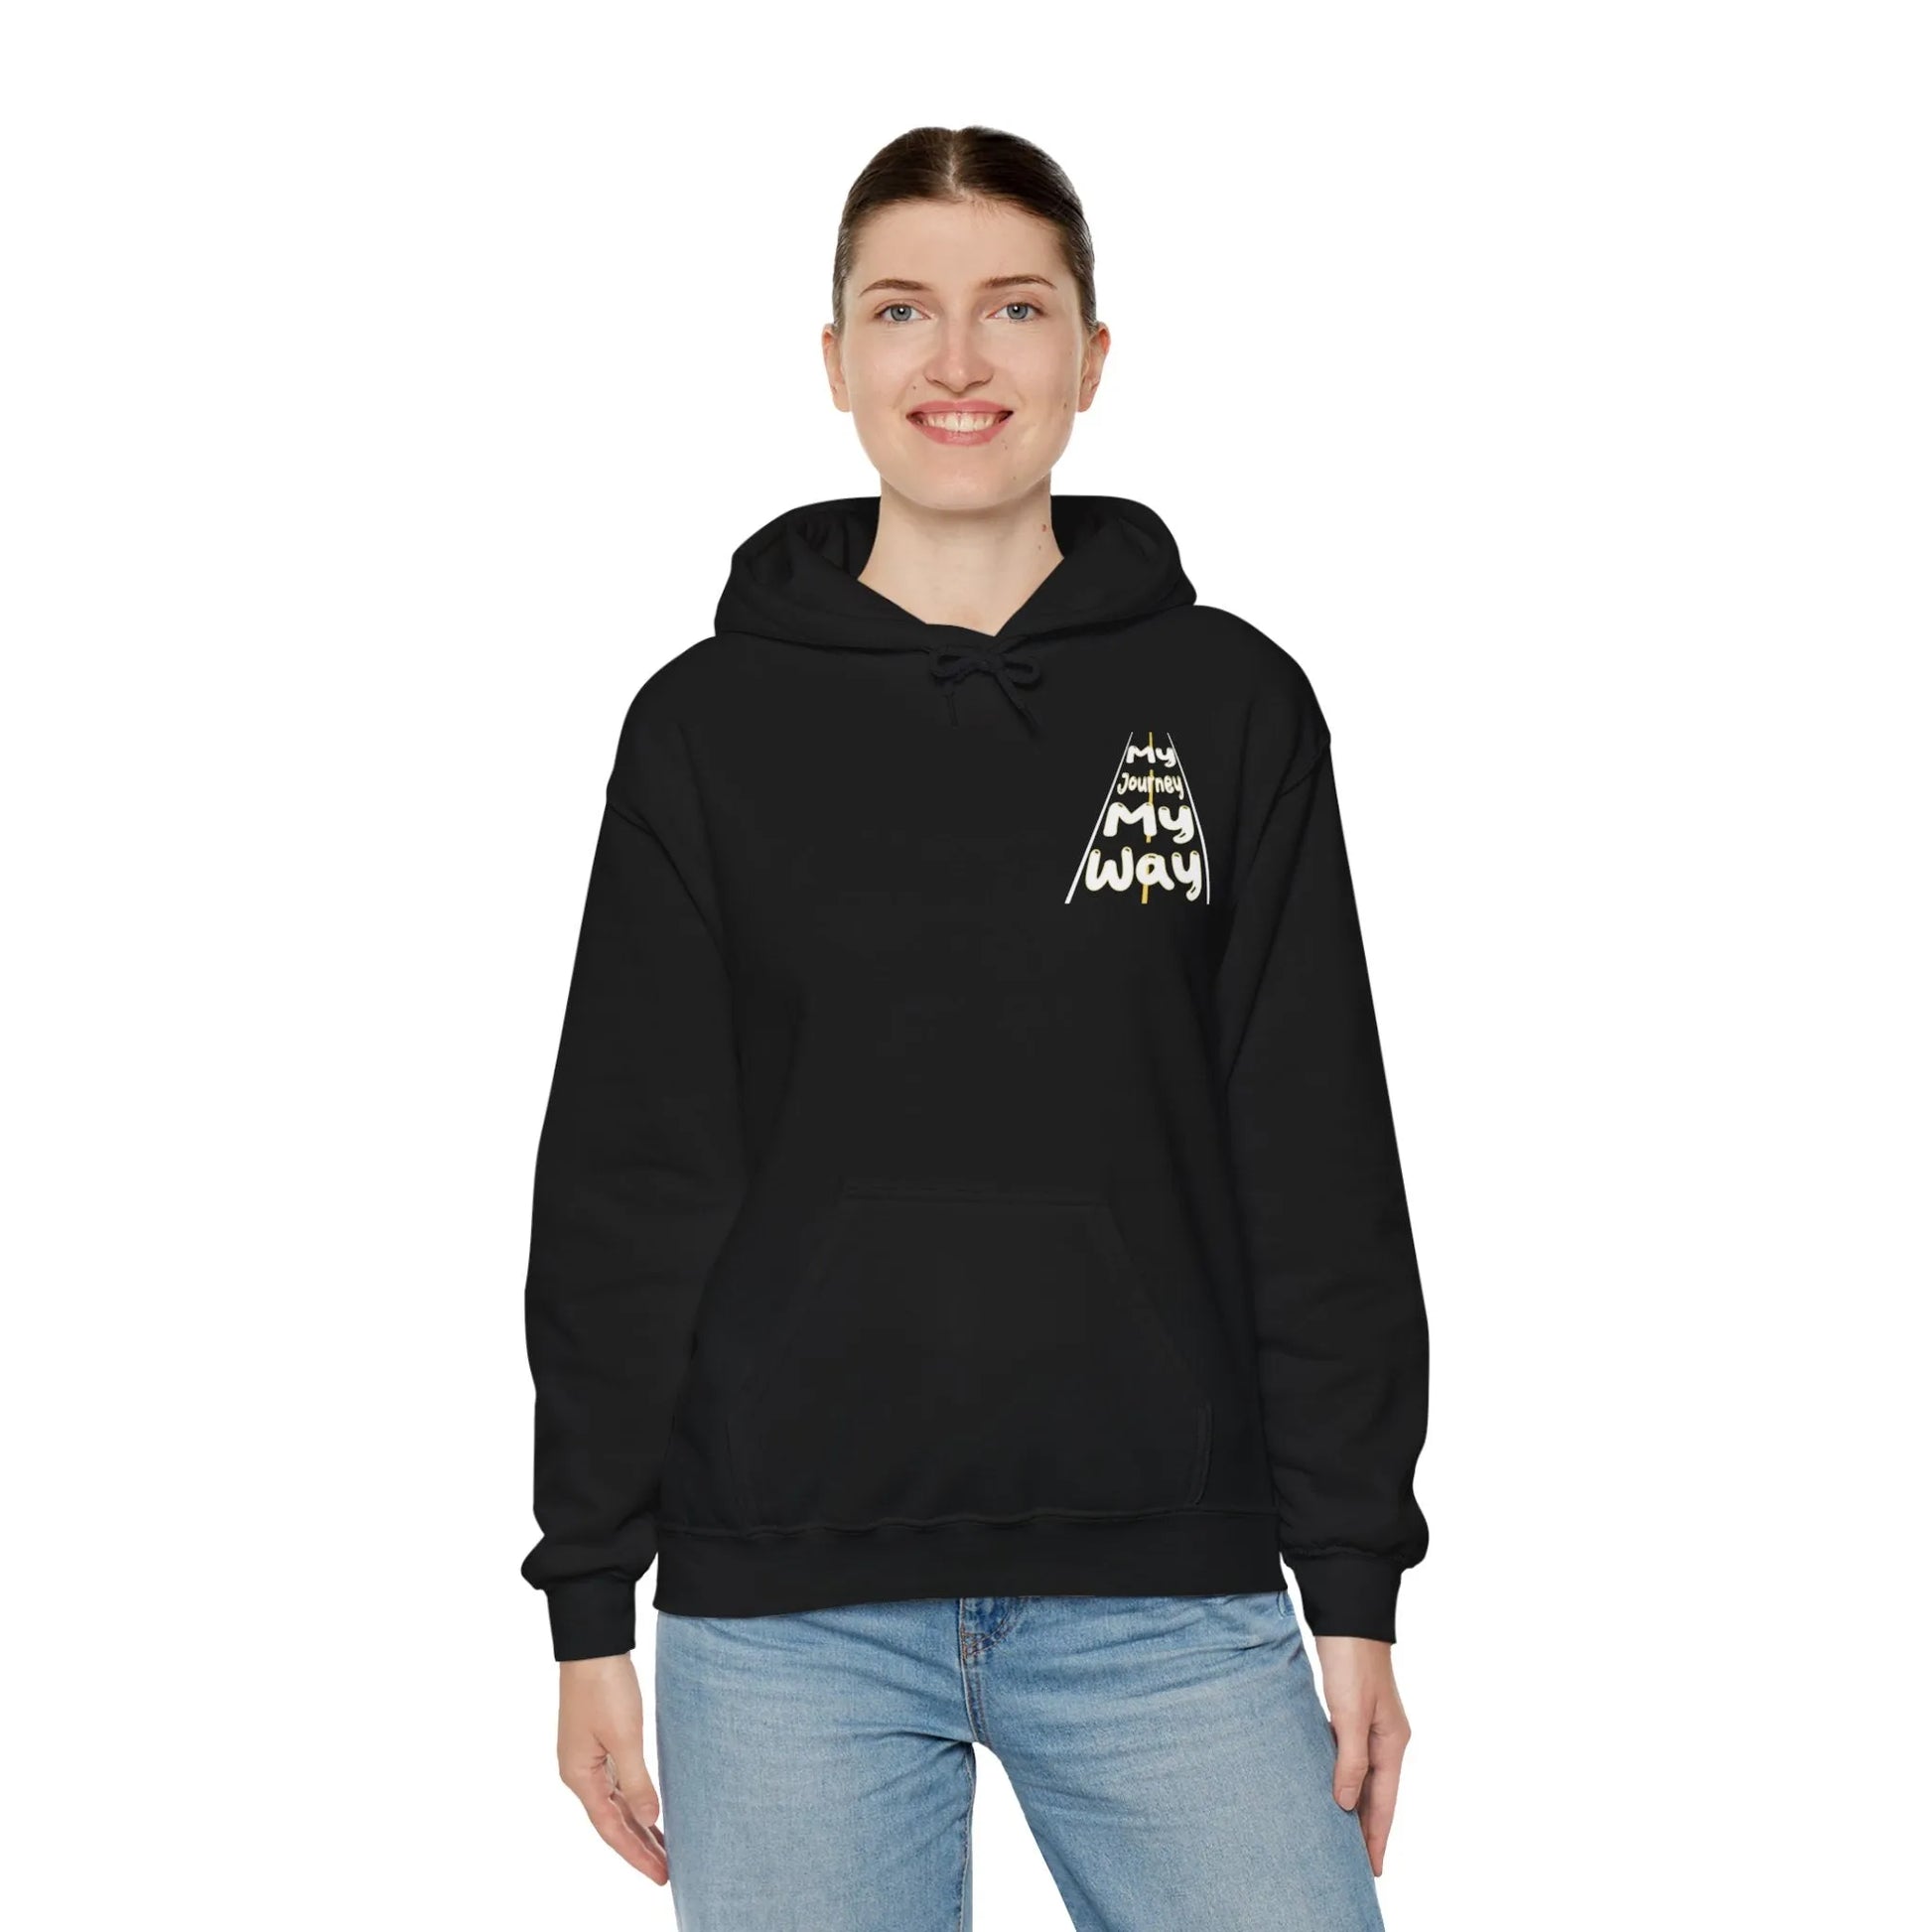 My Journey My Way: Stay In Your Lane Hooded Sweatshirt - Stay In Your Lane Sweatshirt - Trendy Graphic  Hoodie Front View Female Model 2